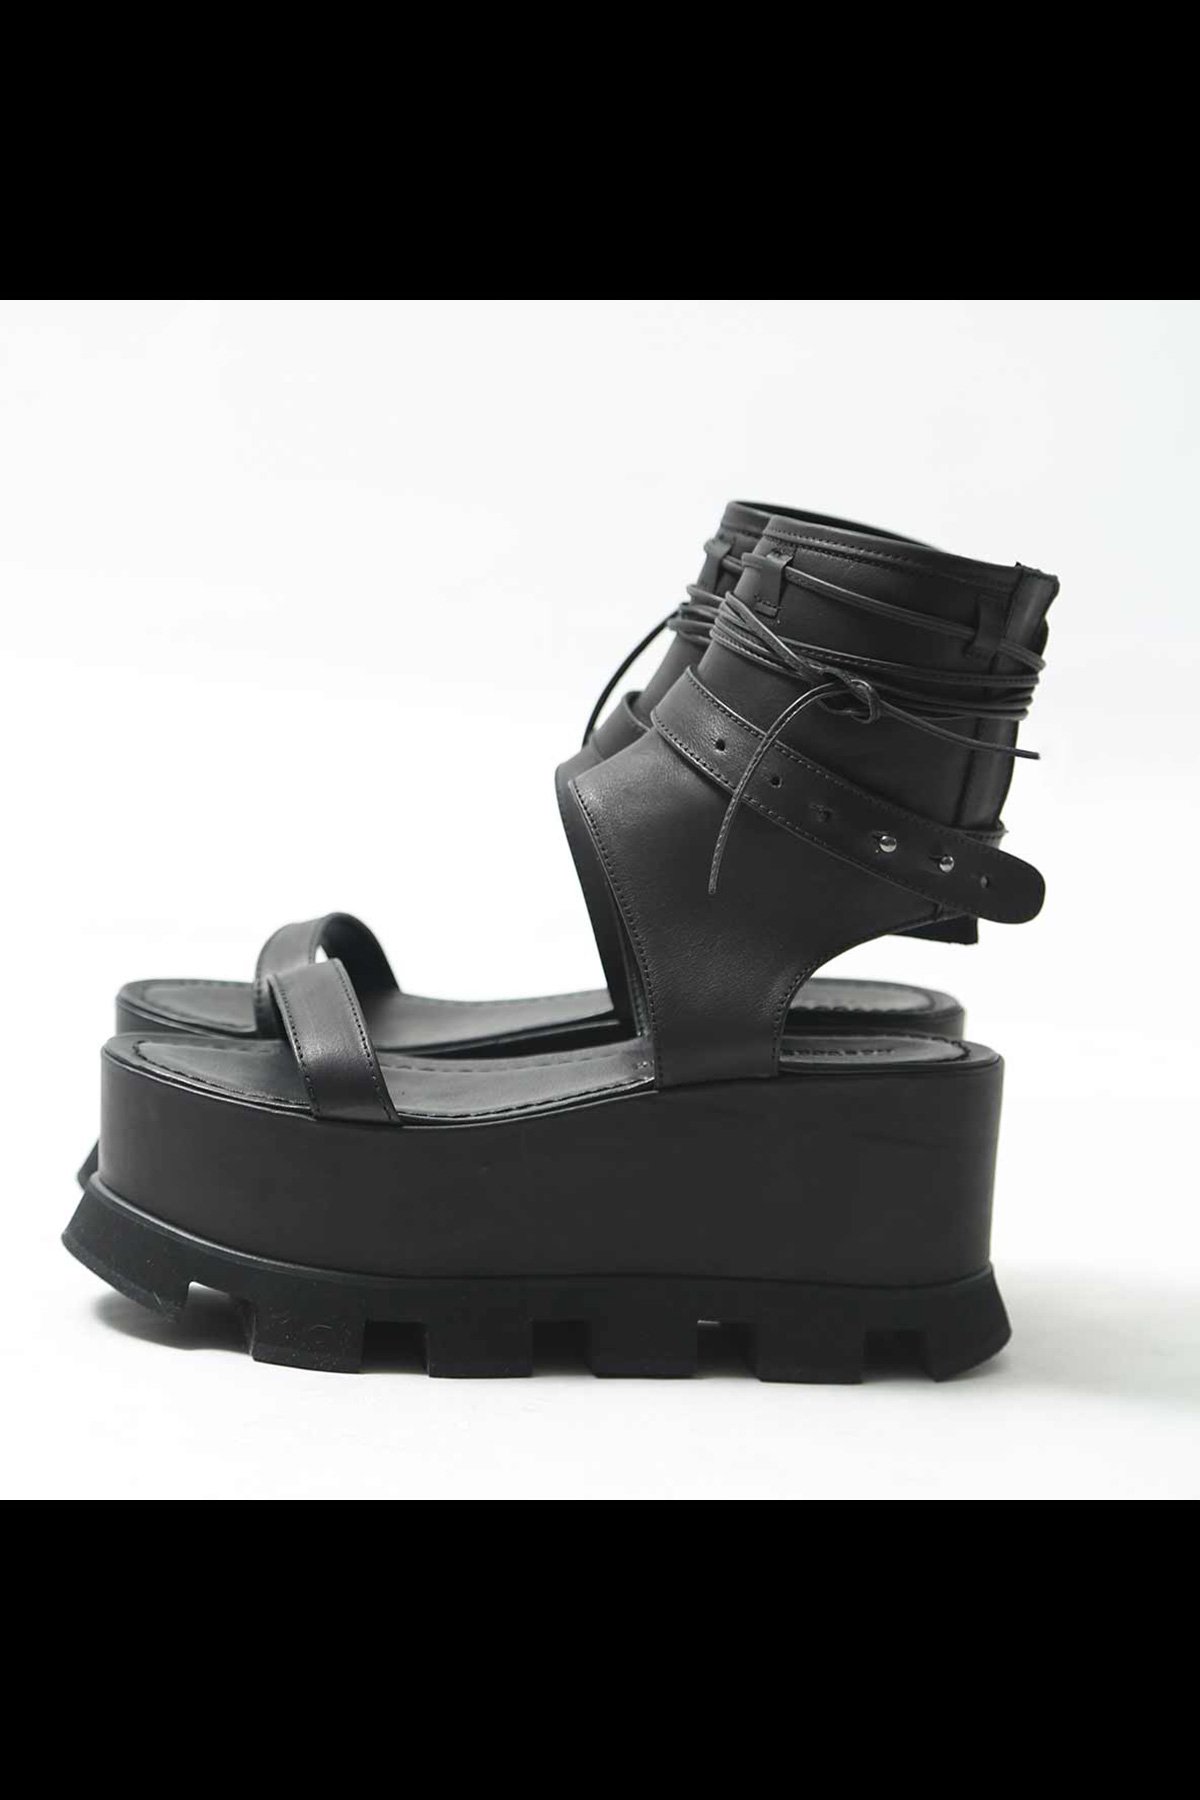 <img class='new_mark_img1' src='https://img.shop-pro.jp/img/new/icons56.gif' style='border:none;display:inline;margin:0px;padding:0px;width:auto;' />PLATFORM WEDGE ANKLE SANDALS W12_BLACK